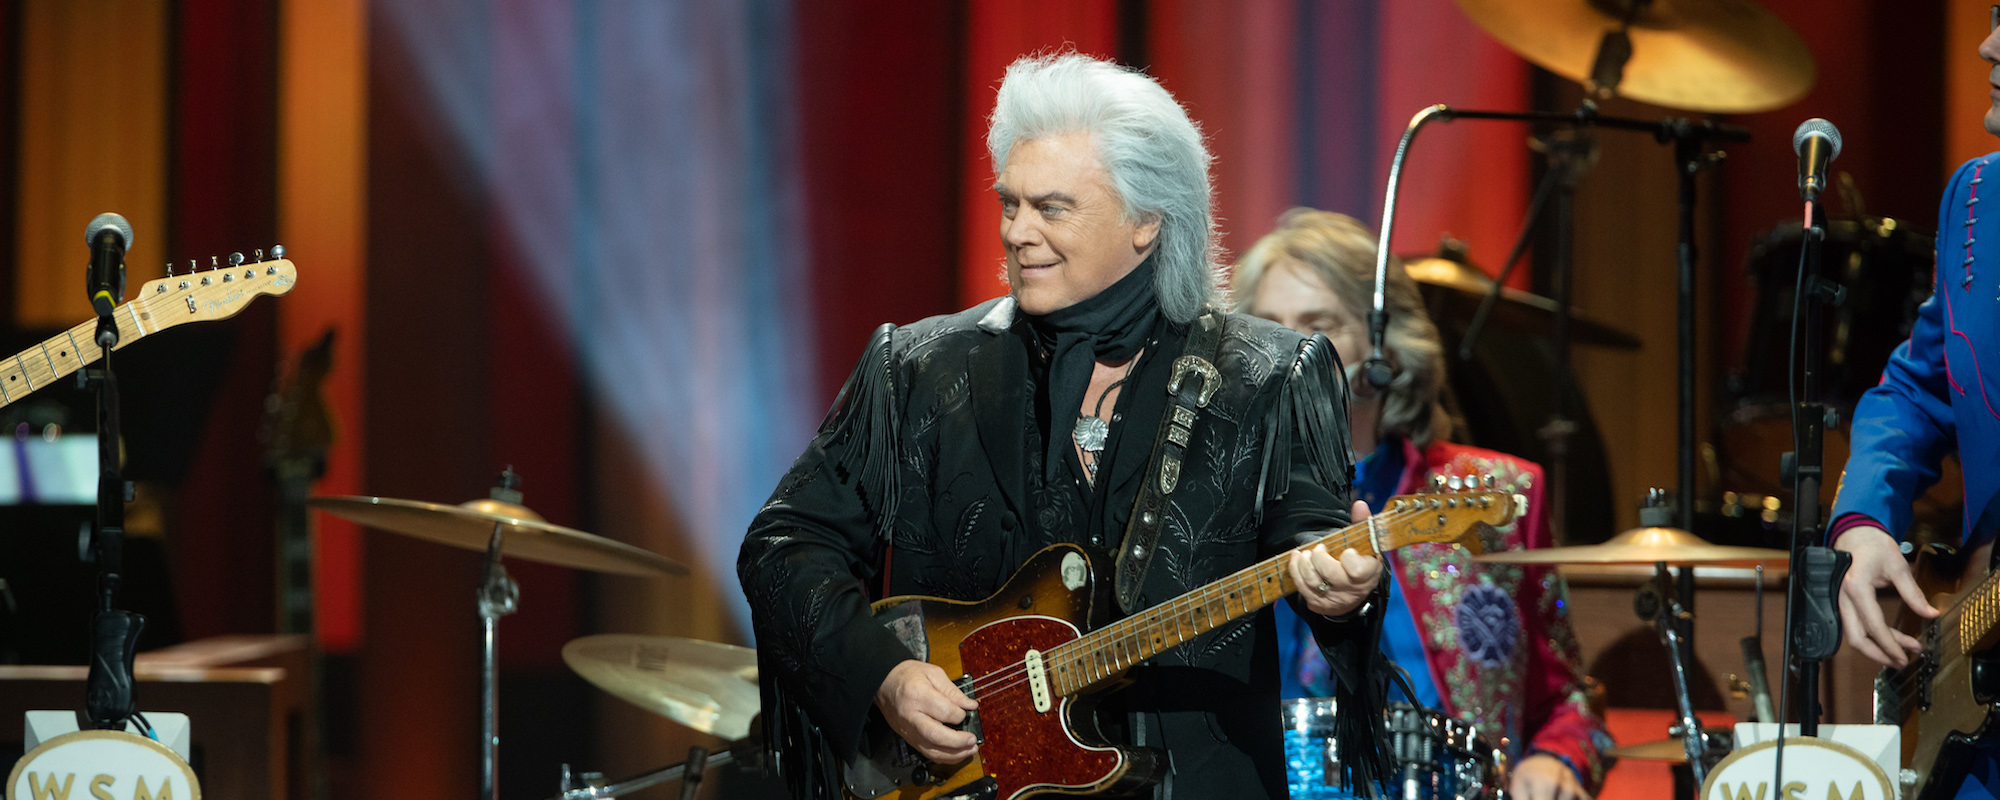 Marty Stuart Shares “Sitting Alone” from Forthcoming Album